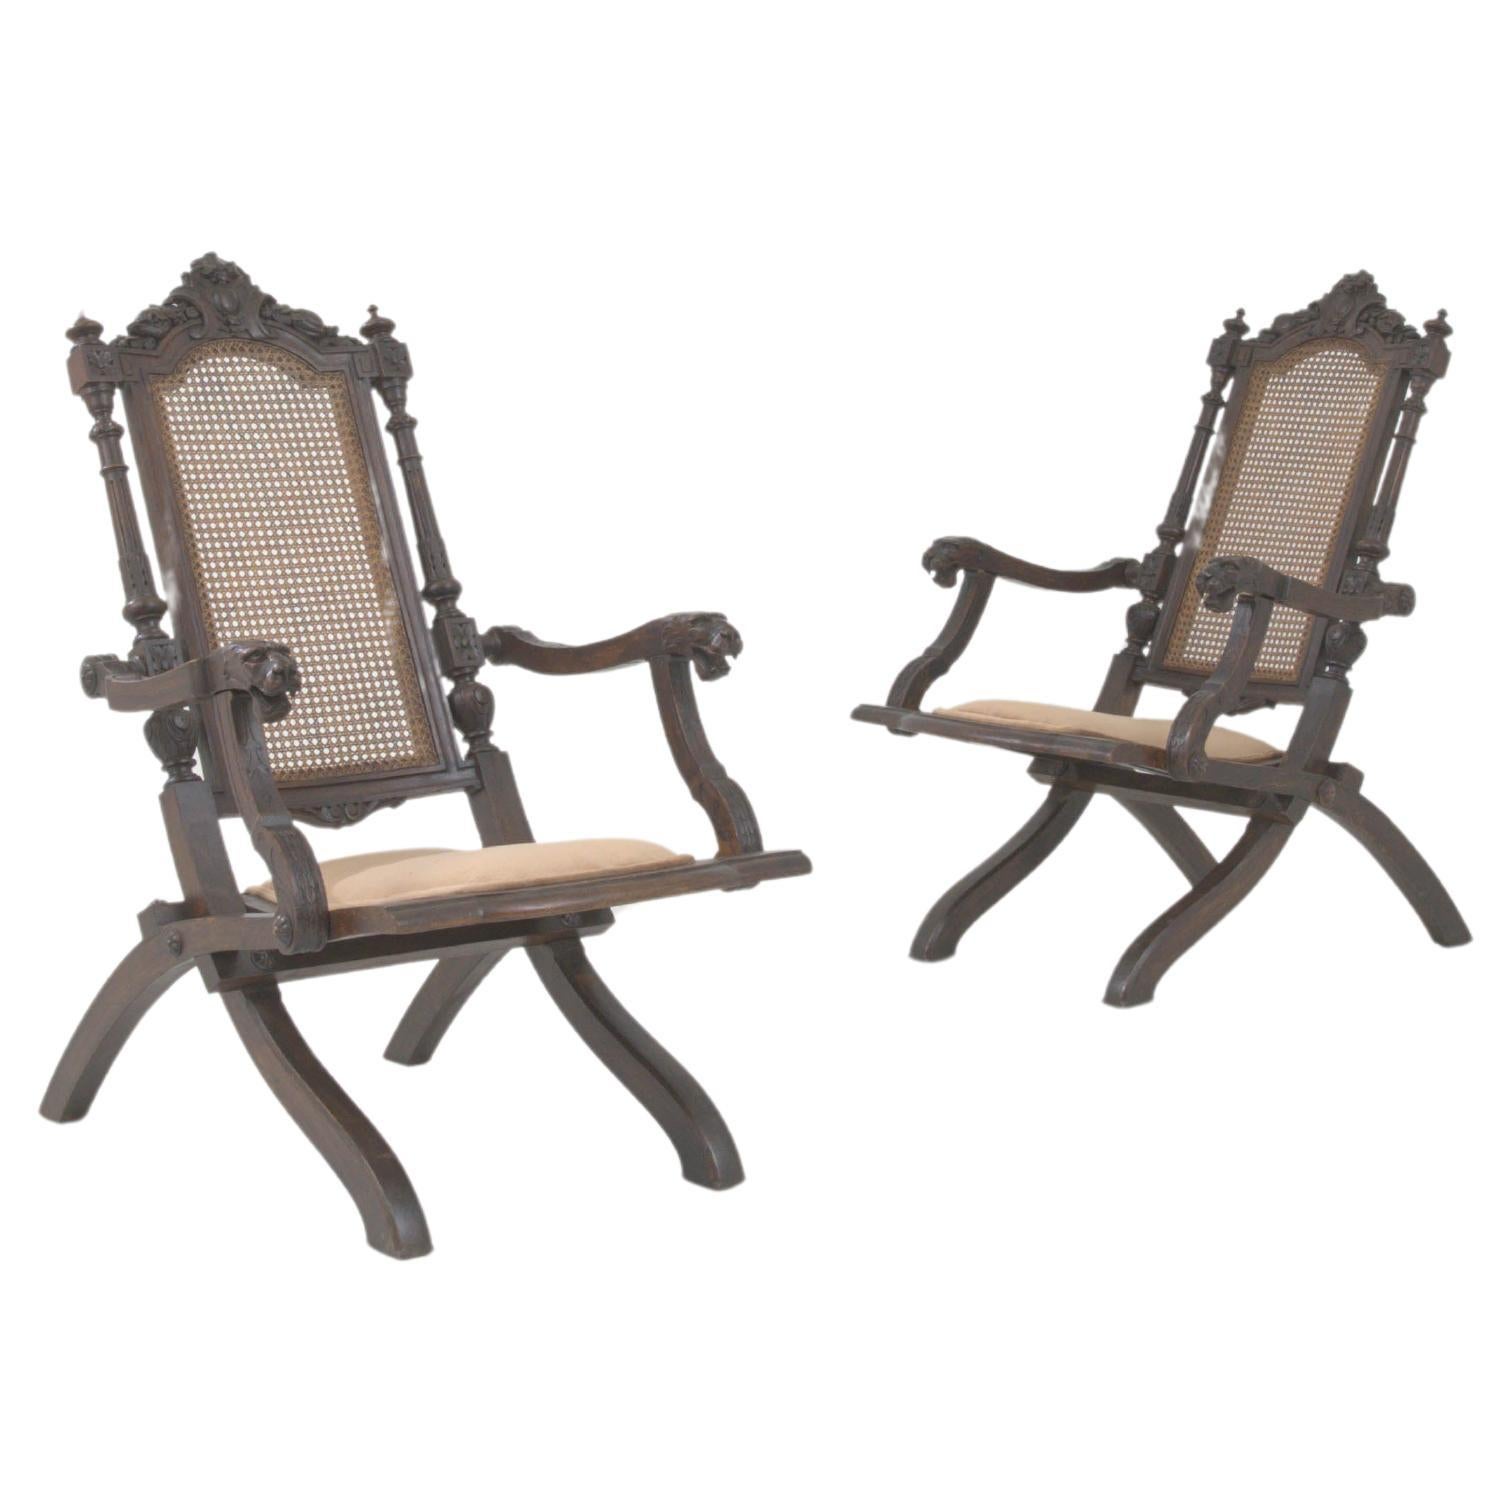 1900s French Wooden Folding Armchairs with Upholstered Seats, a Pair